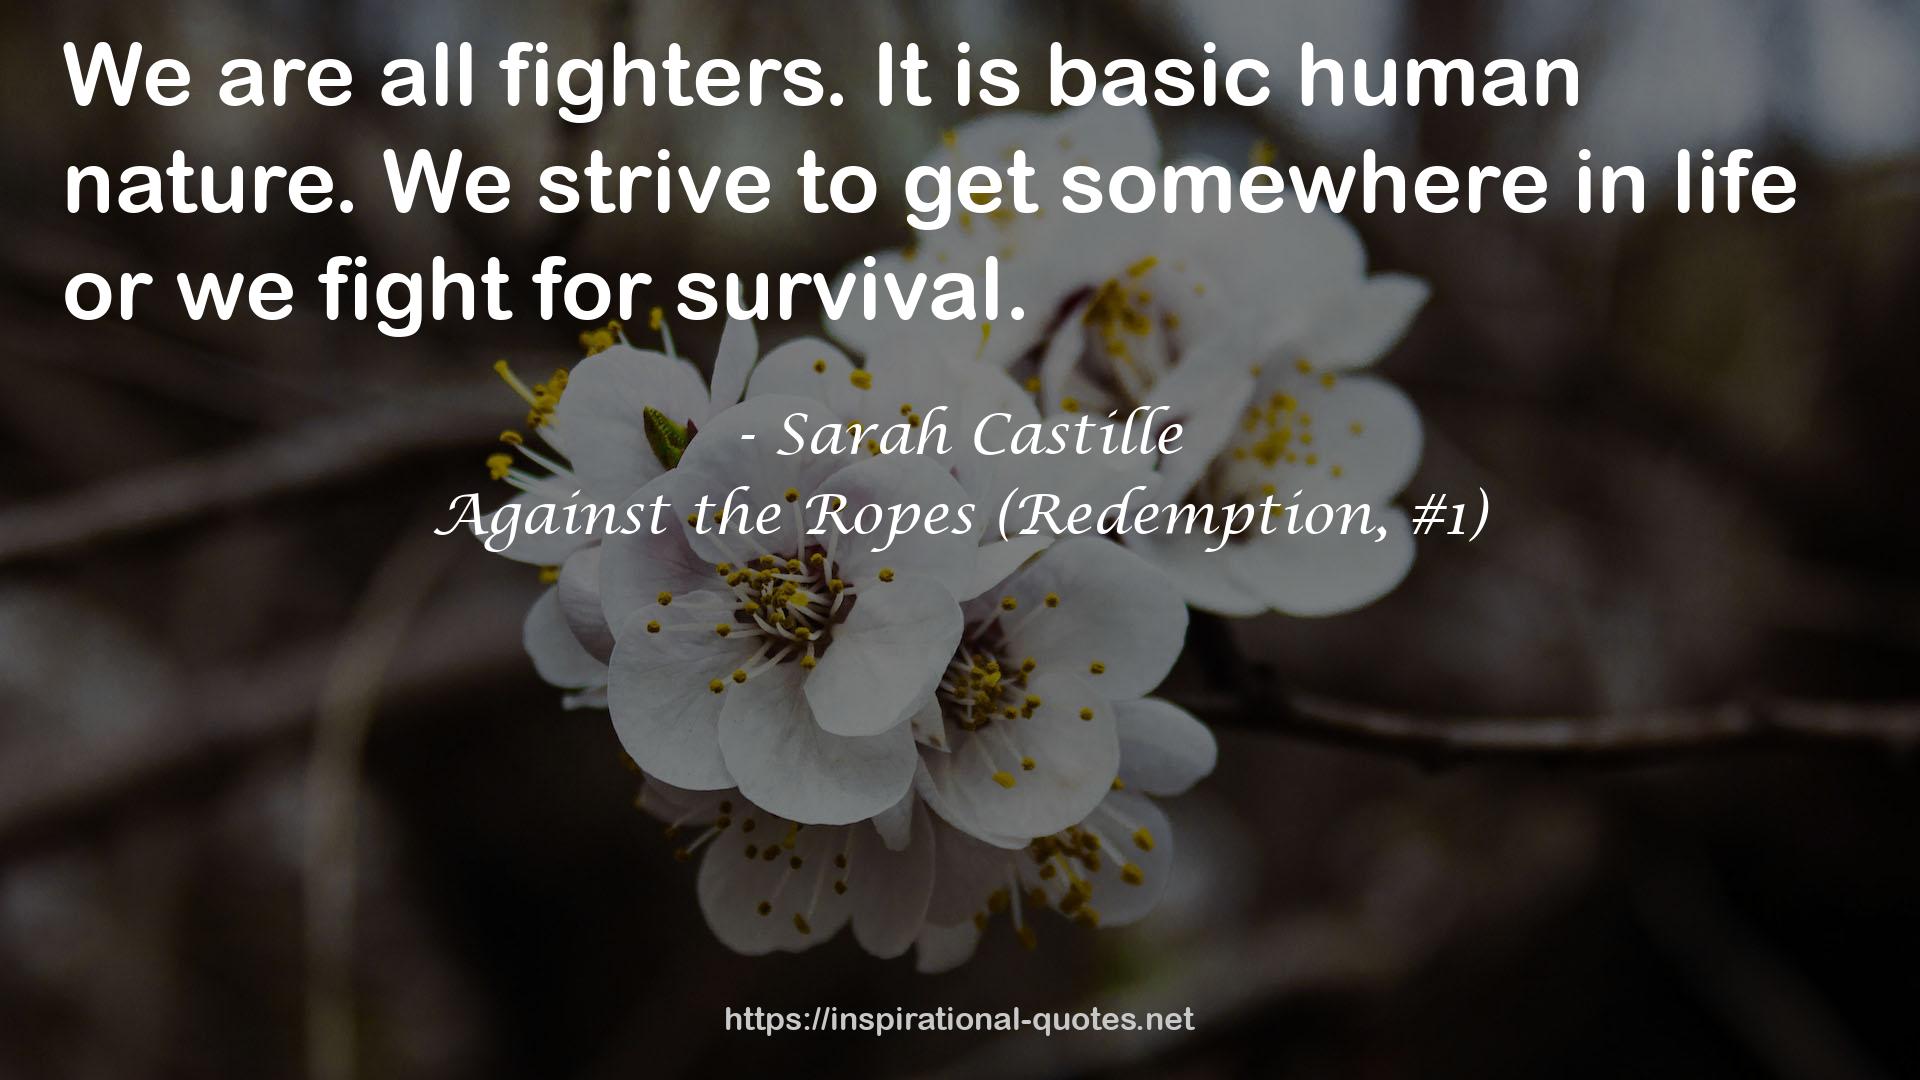 Against the Ropes (Redemption, #1) QUOTES